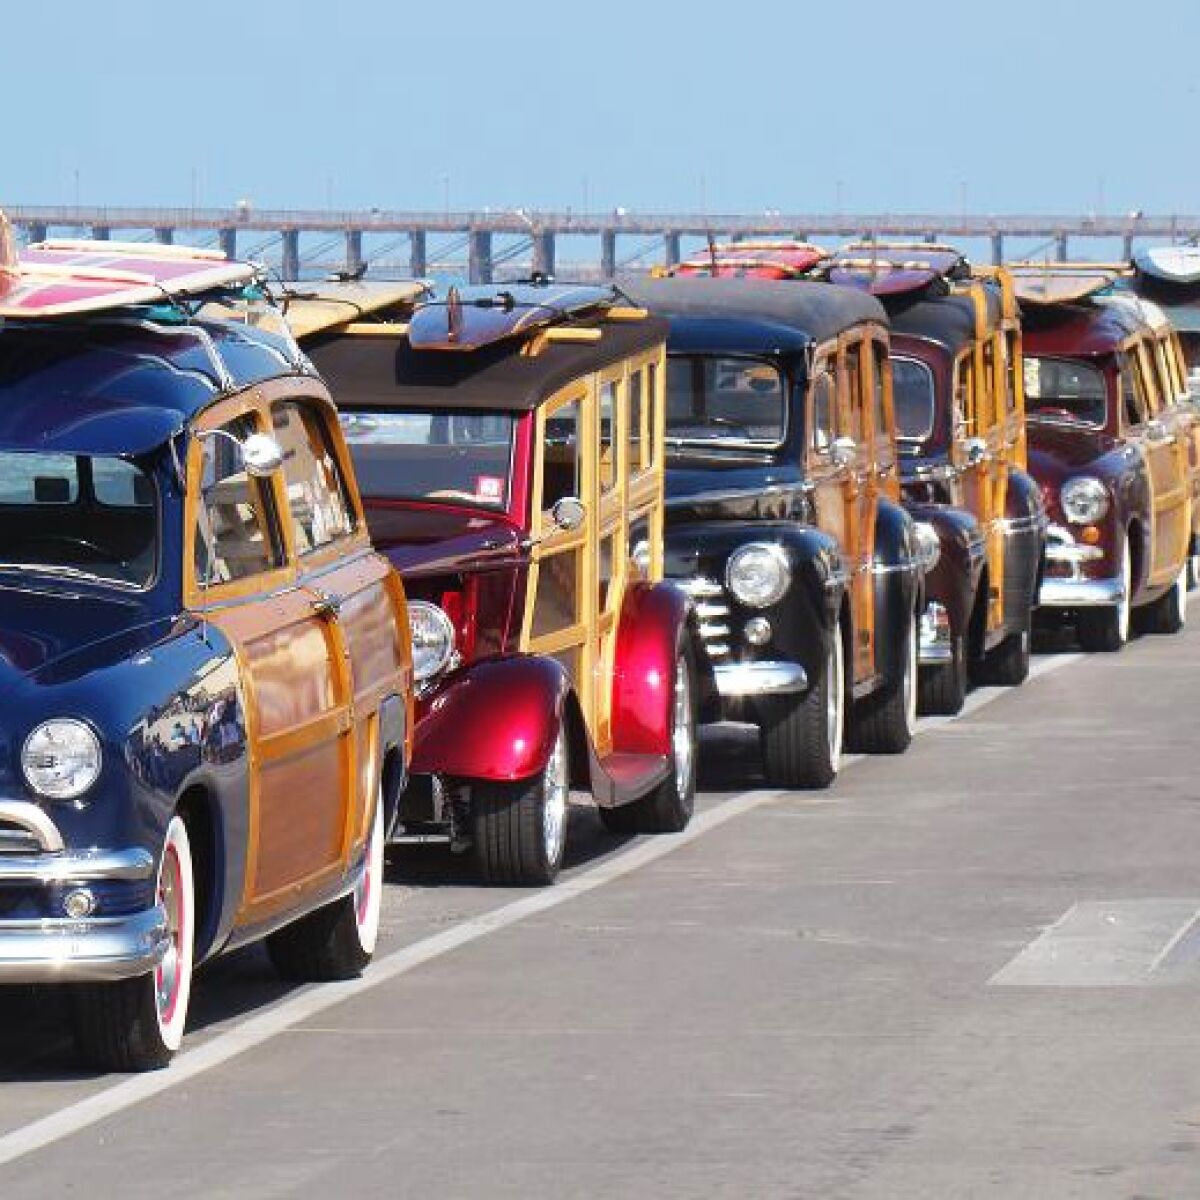 The 40th Annual Wavecrest Woodie Meet will be held Saturday, Sept. 21 at Moonlight Beach Parking lot.